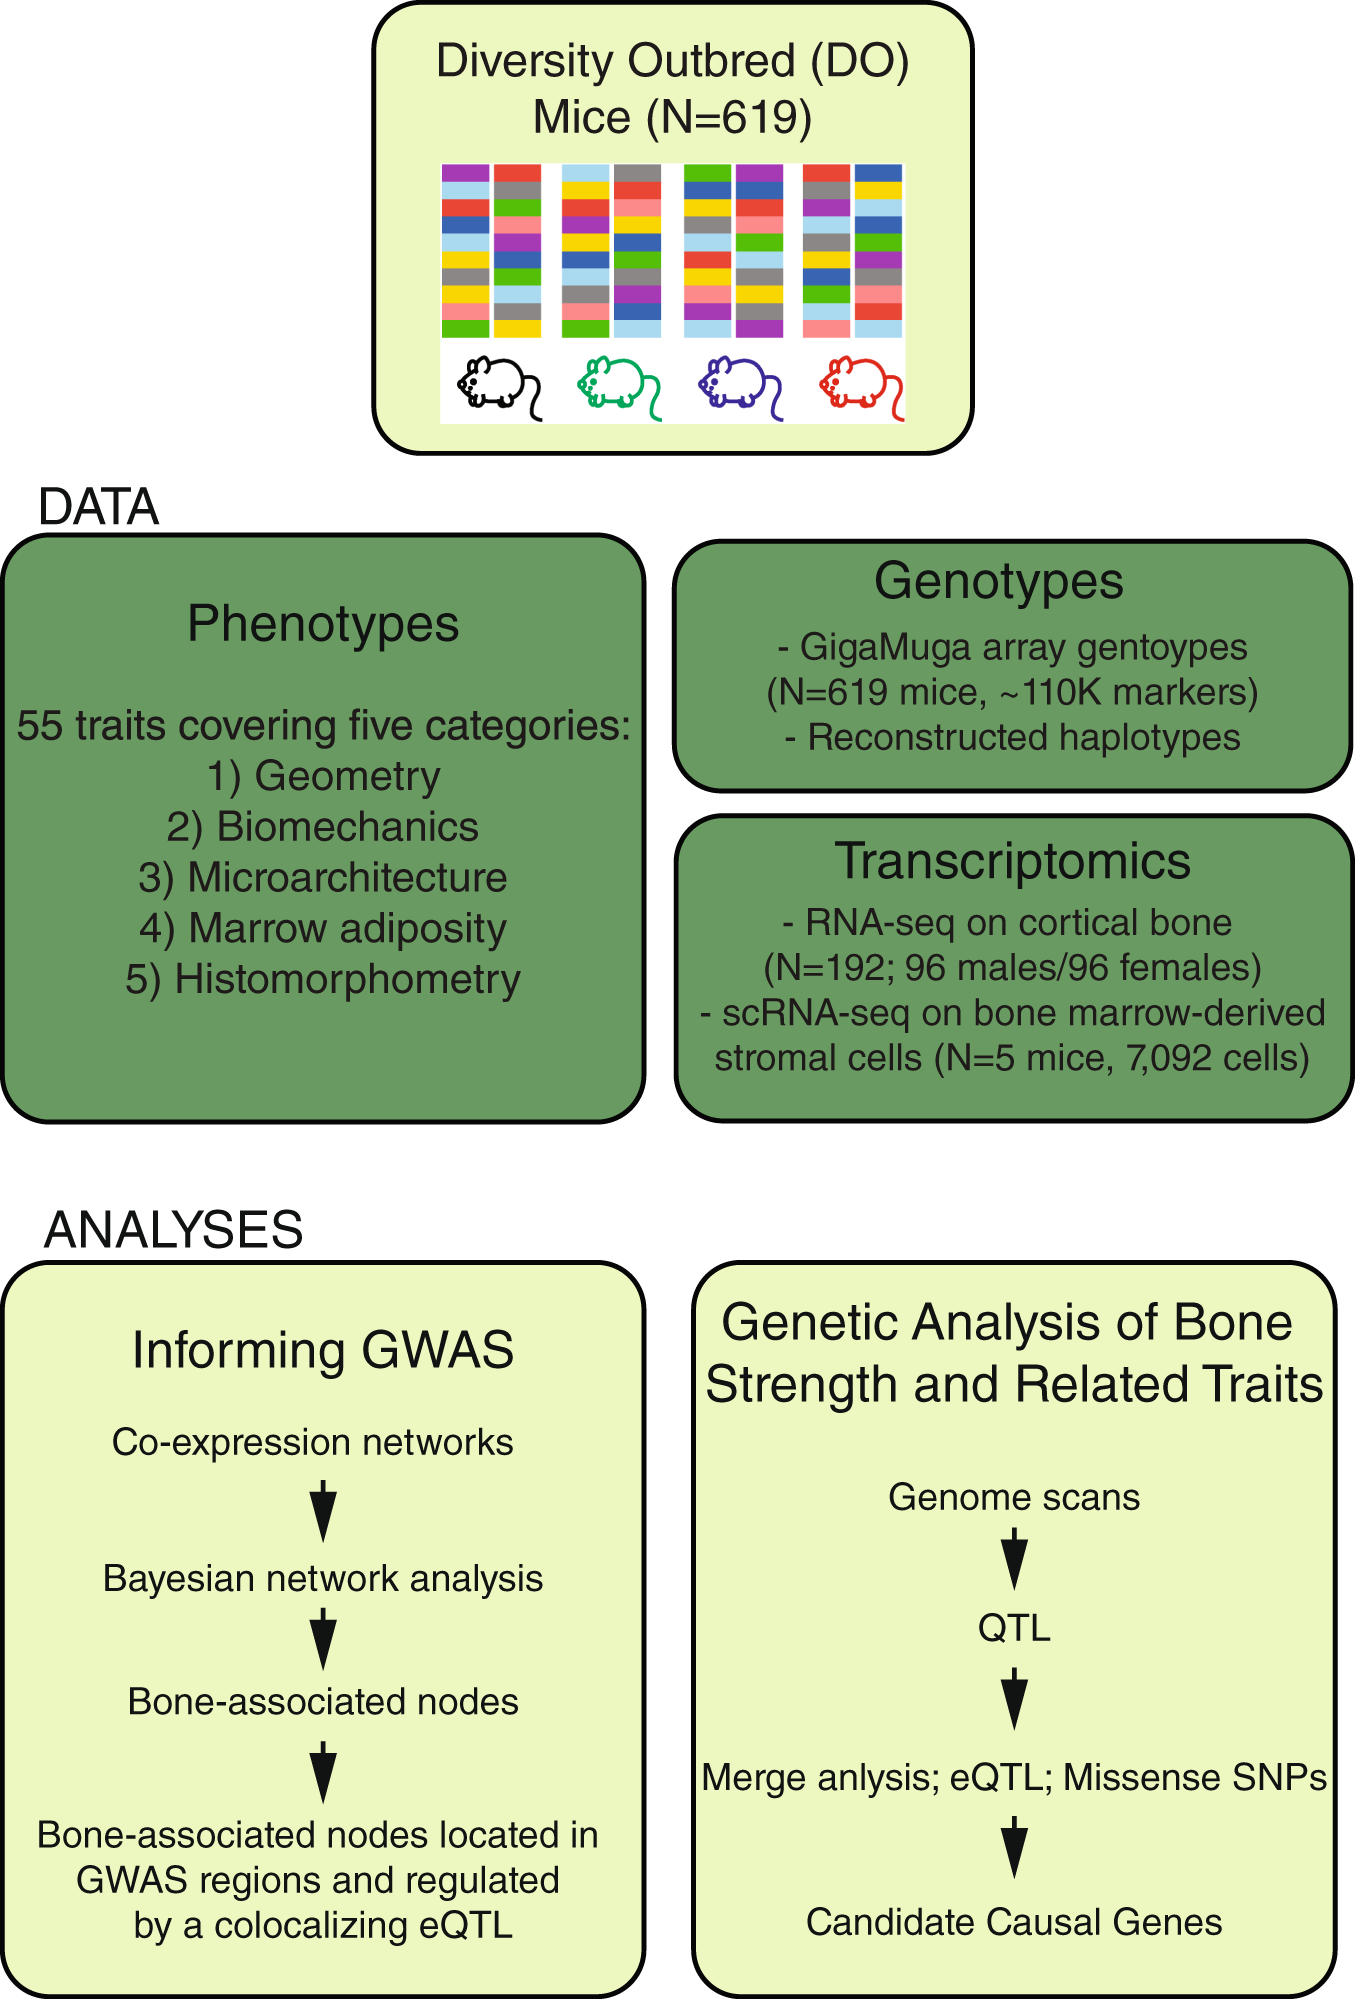 Systems genetics in diversity outbred mice inform BMD GWAS and identify  determinants of bone strength | Nature Communications